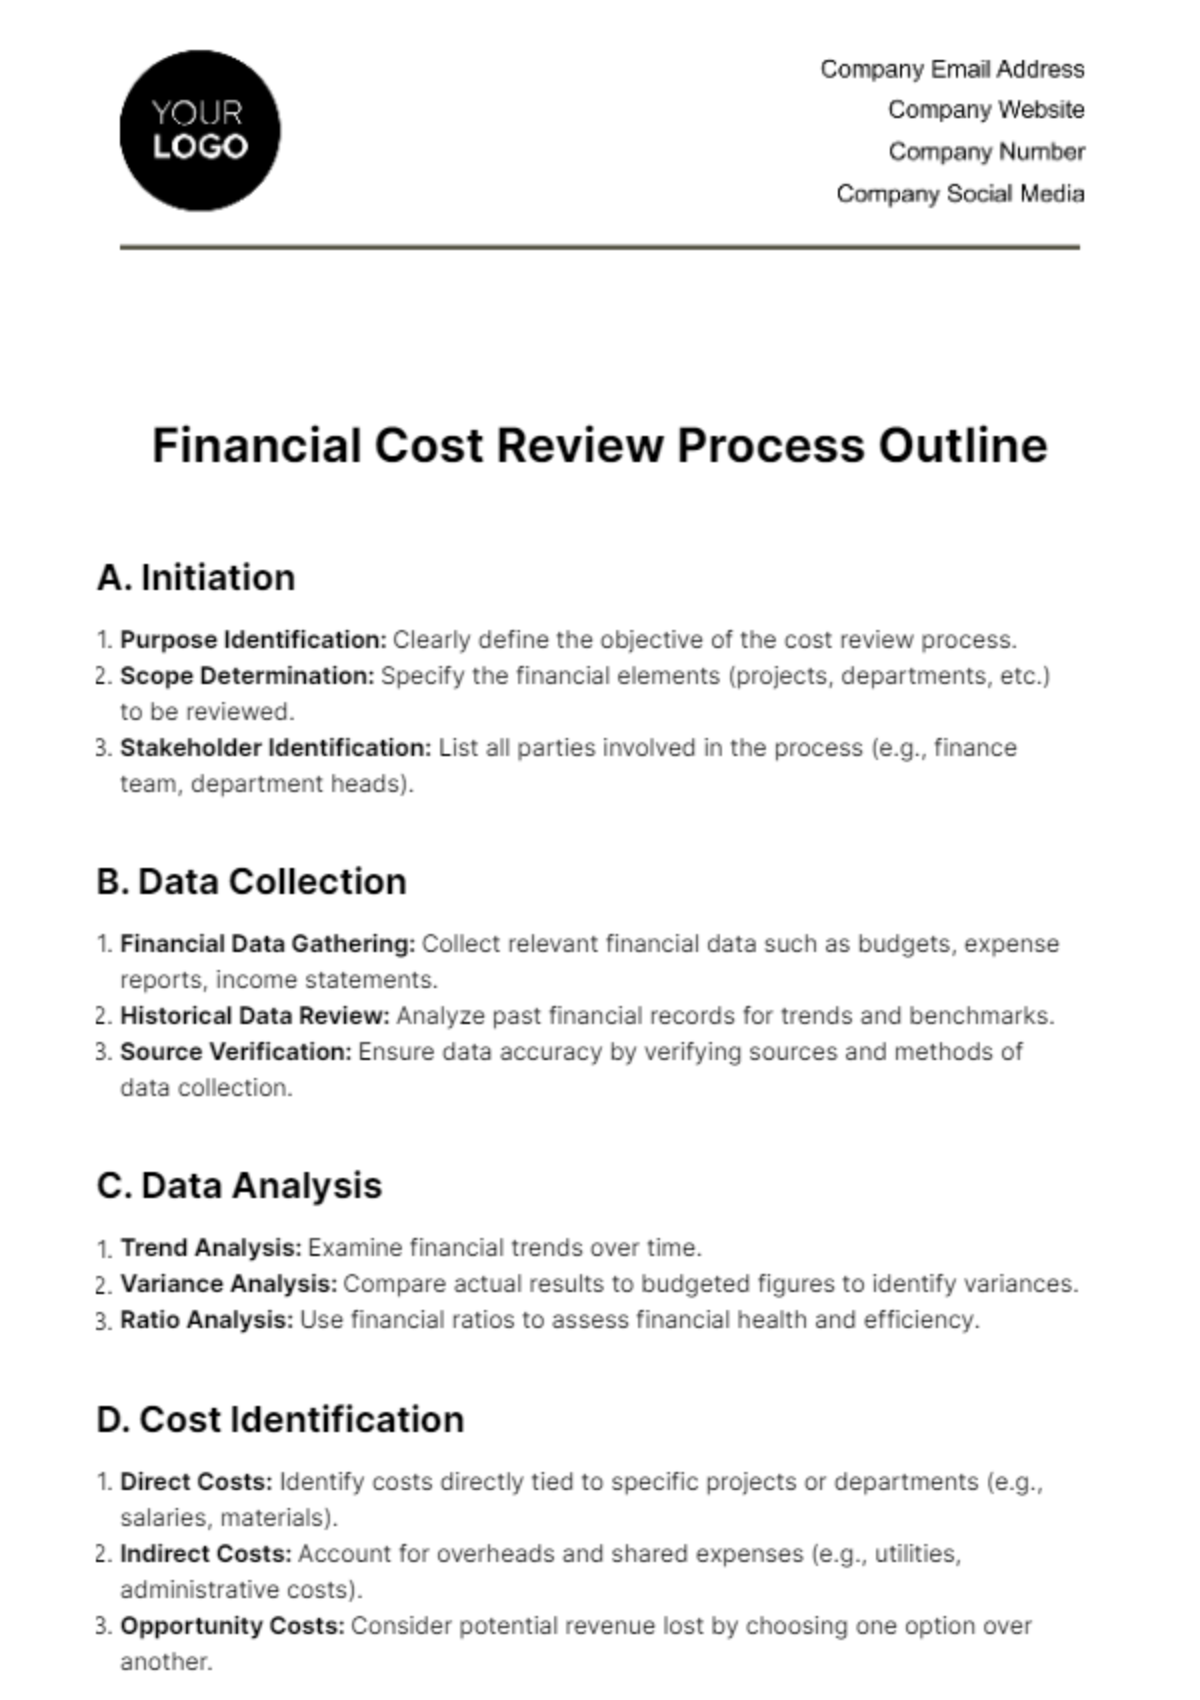 Free Financial Cost Review Process Outline Template